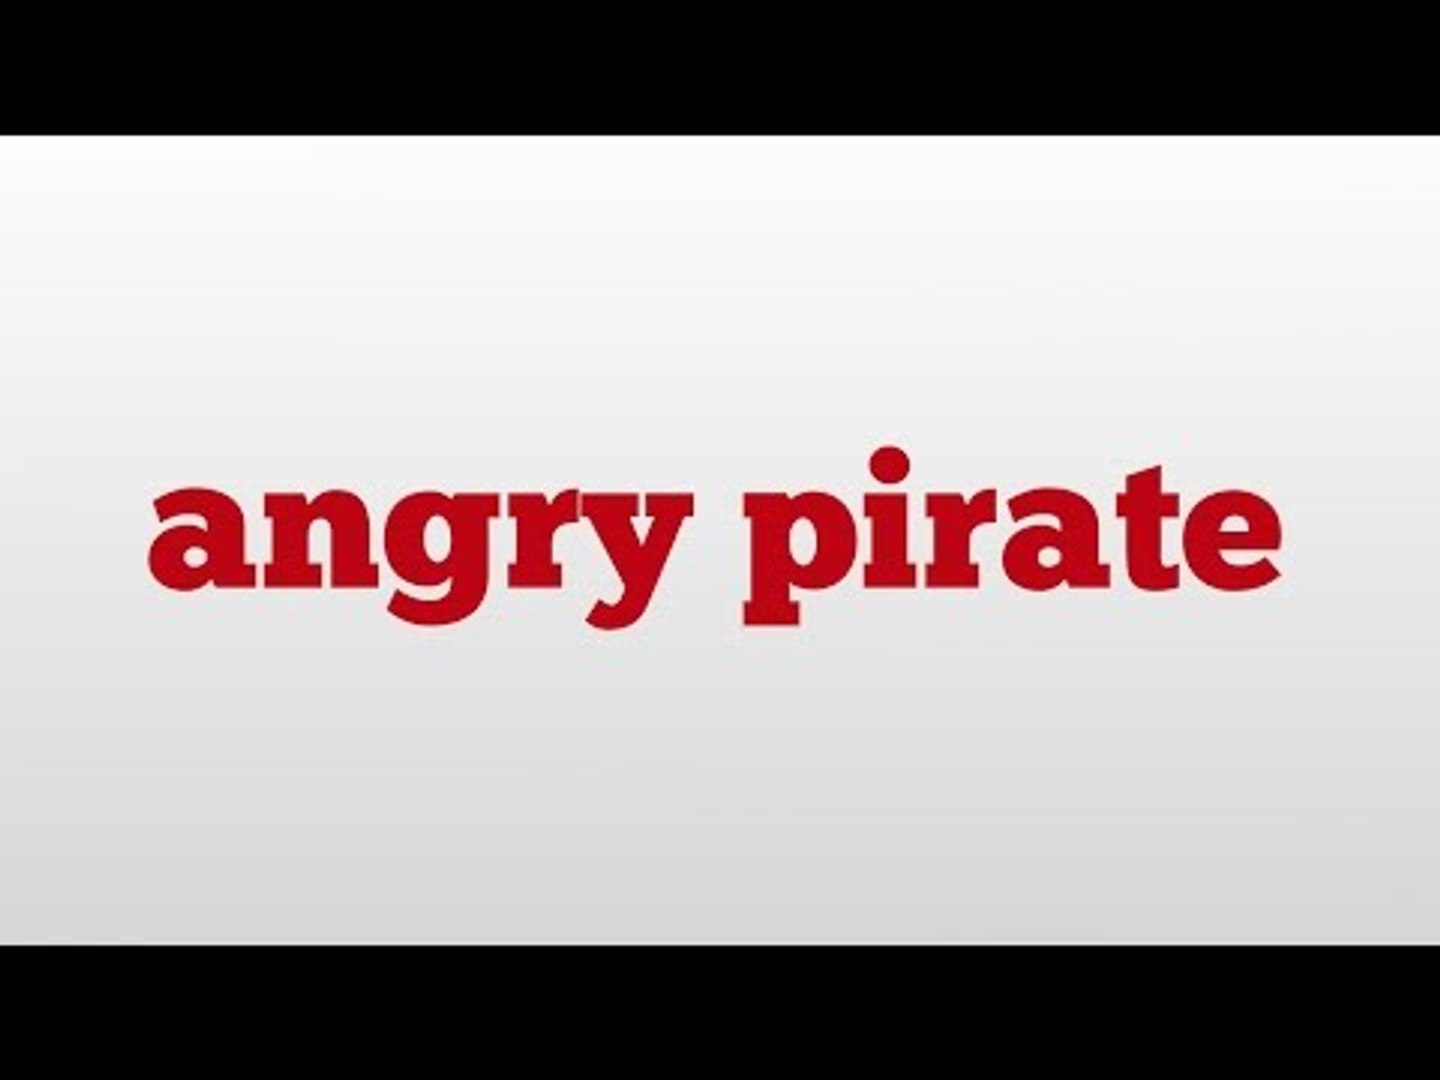 angry pirate meaning and pronunciation - video Dailymotion